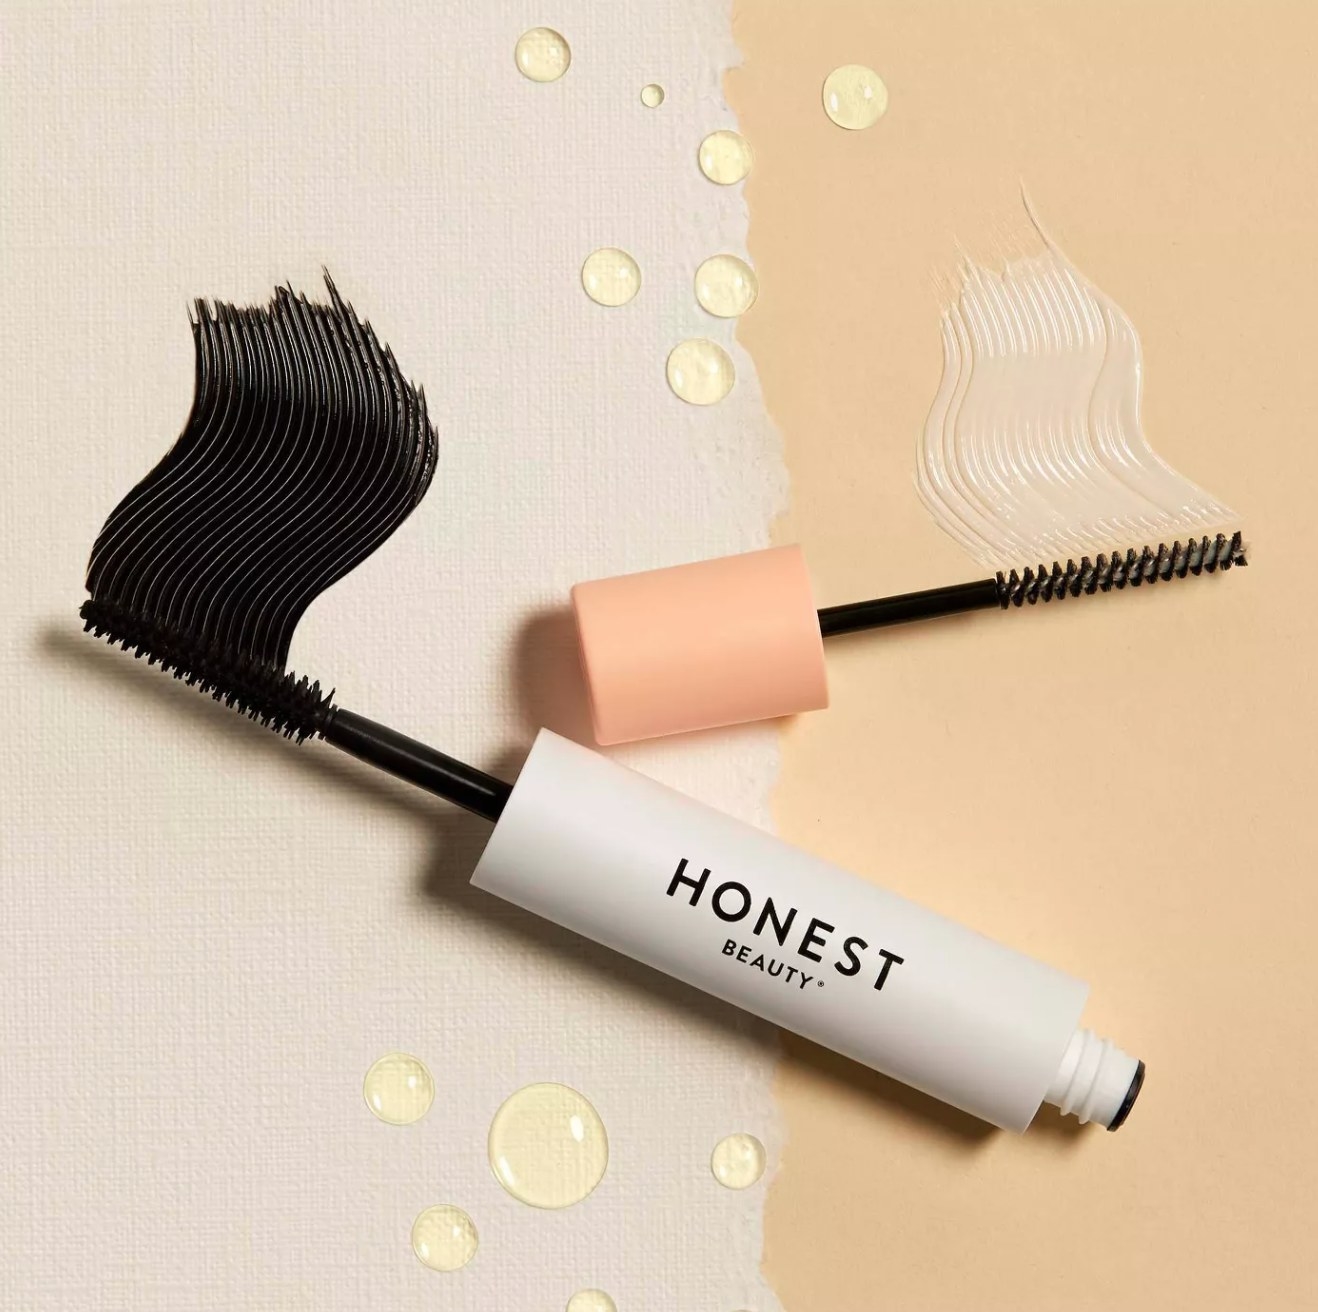 the product with the black mascara side on a cream background with a smudge of mascara and the white primer side on a tan background with a white smudge